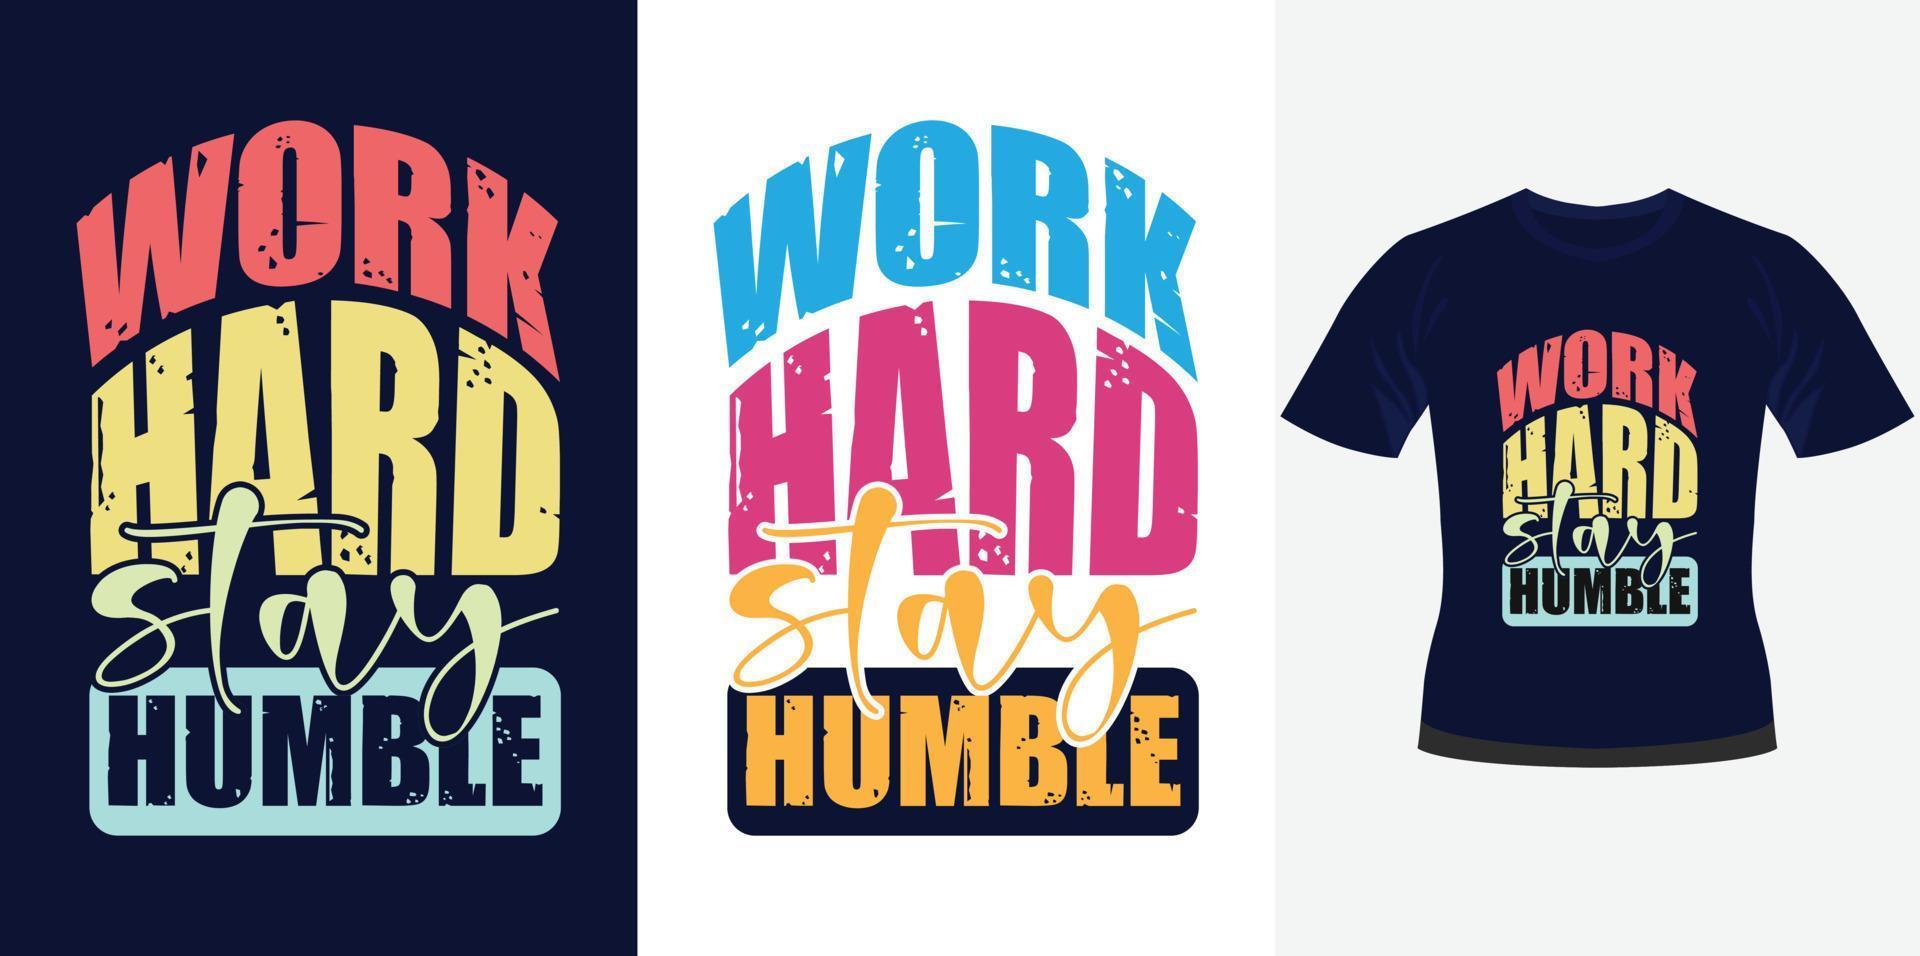 Work hard stay humble trendy motivational typography design for t shirt print vector